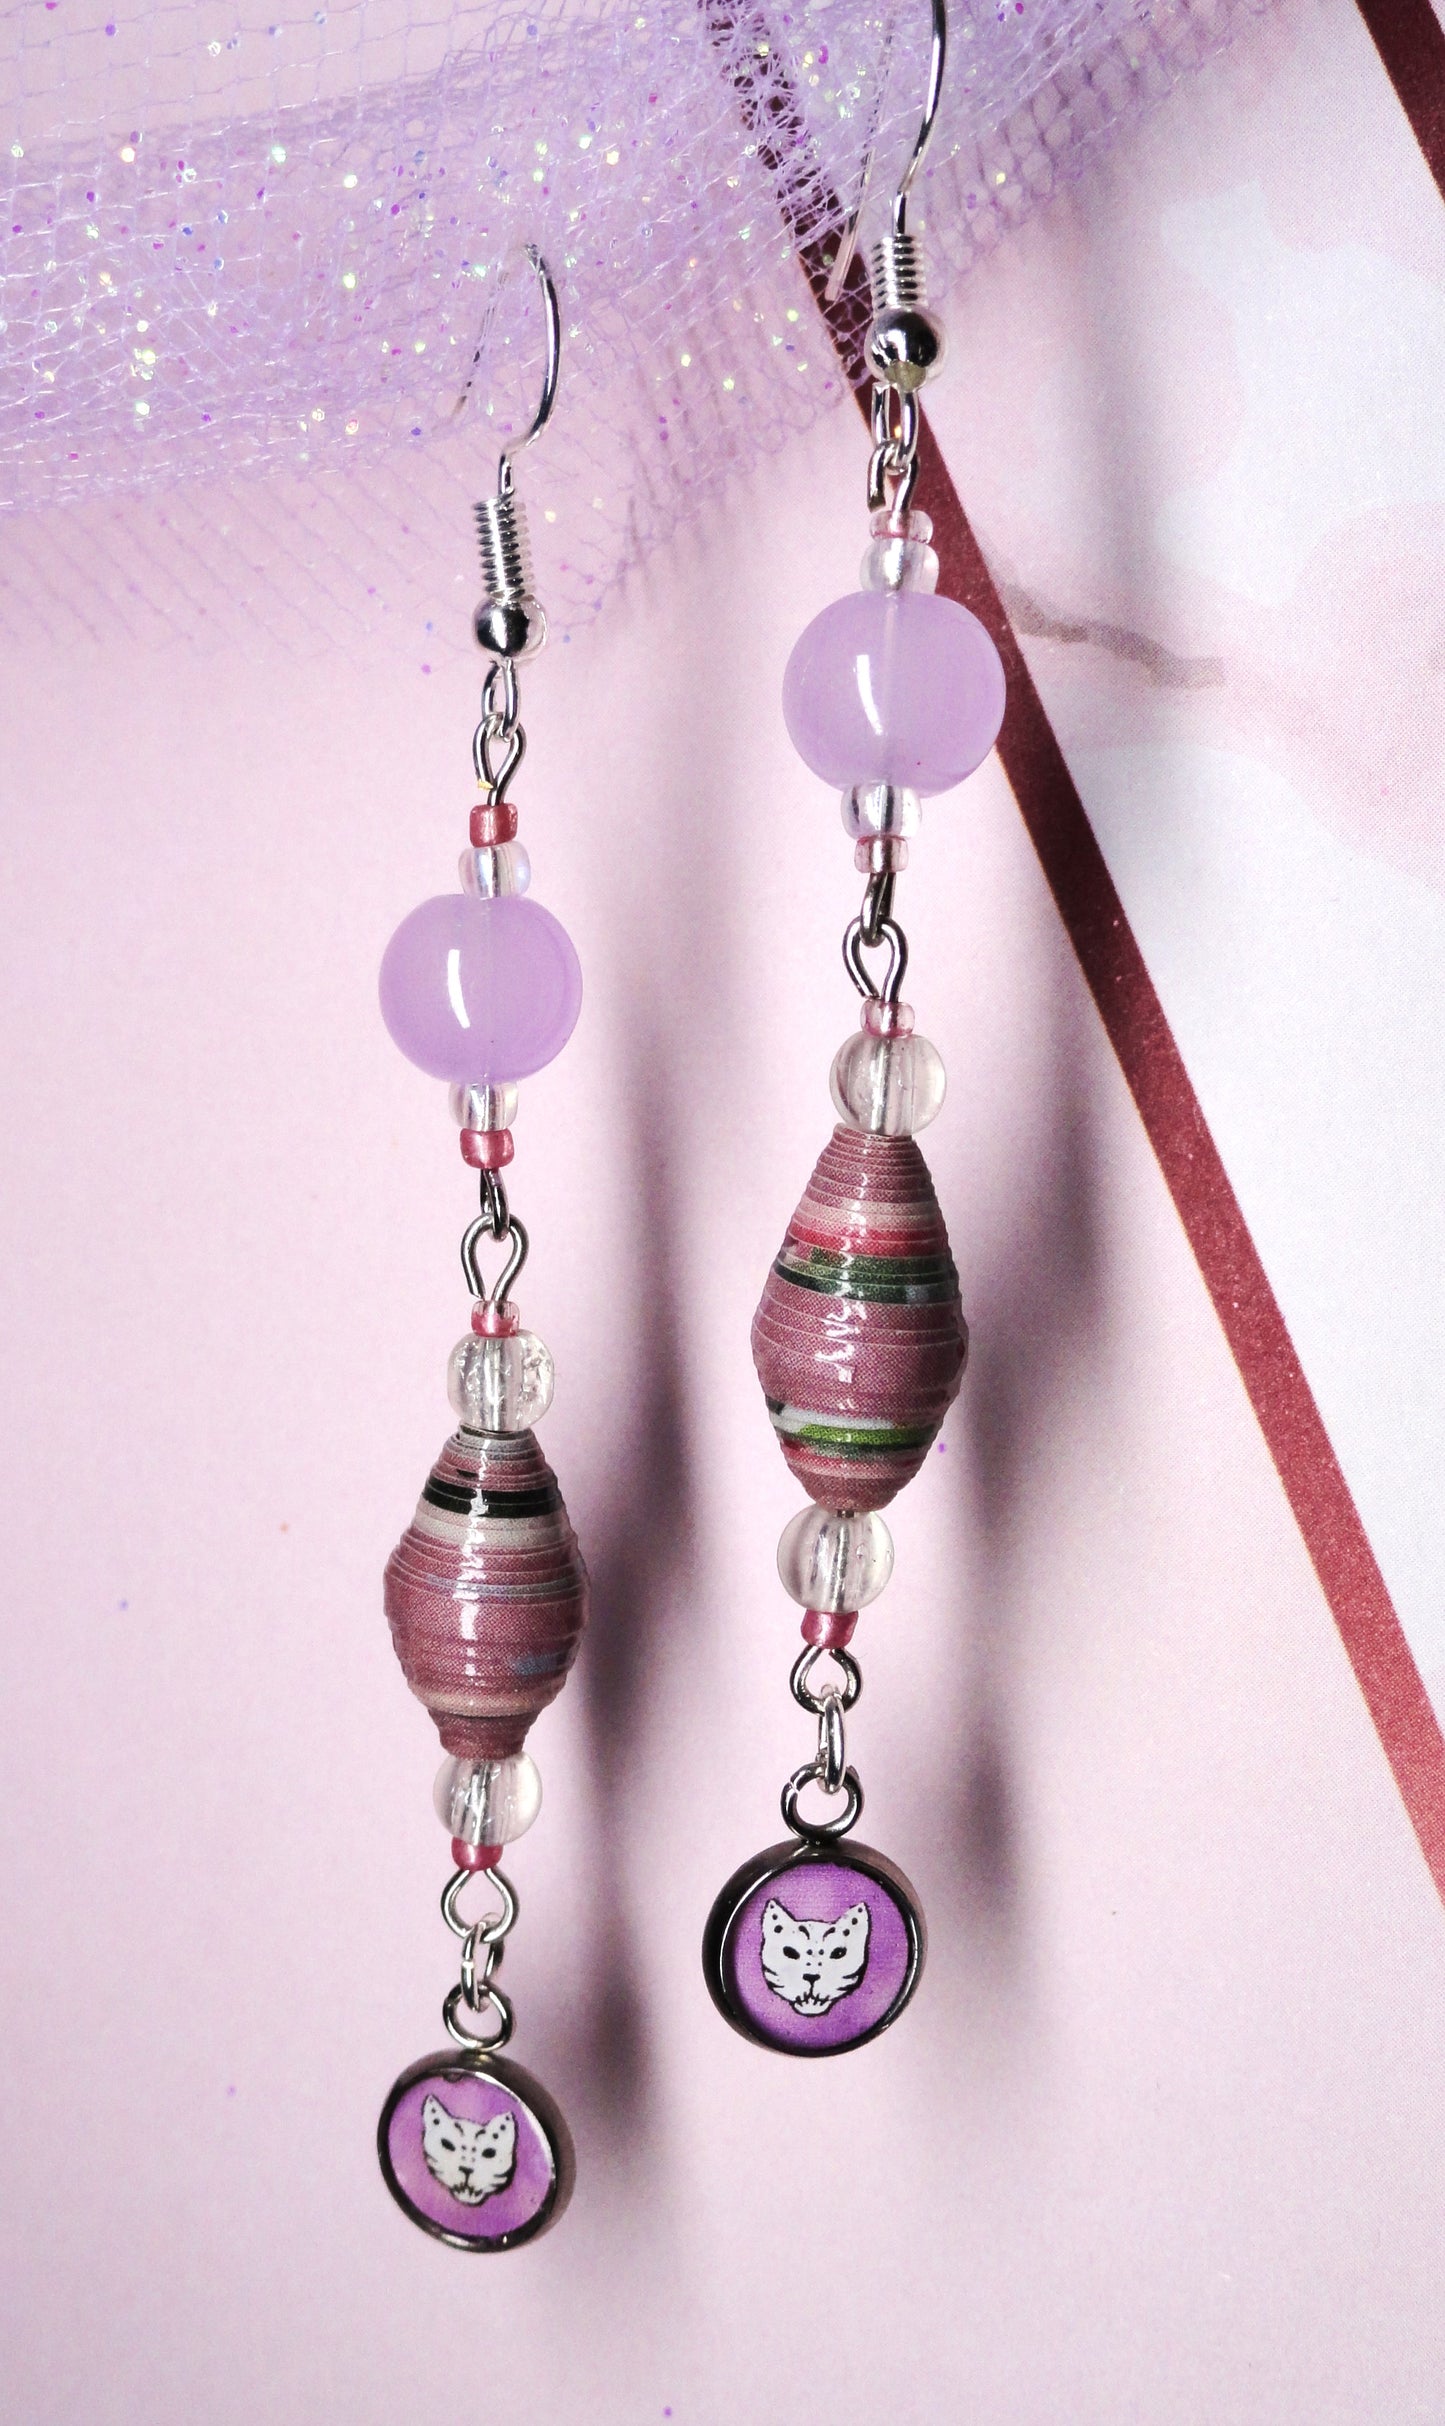 Cat Skull Earrings With Multicolored Handmade Paper Beads and Glass Beads